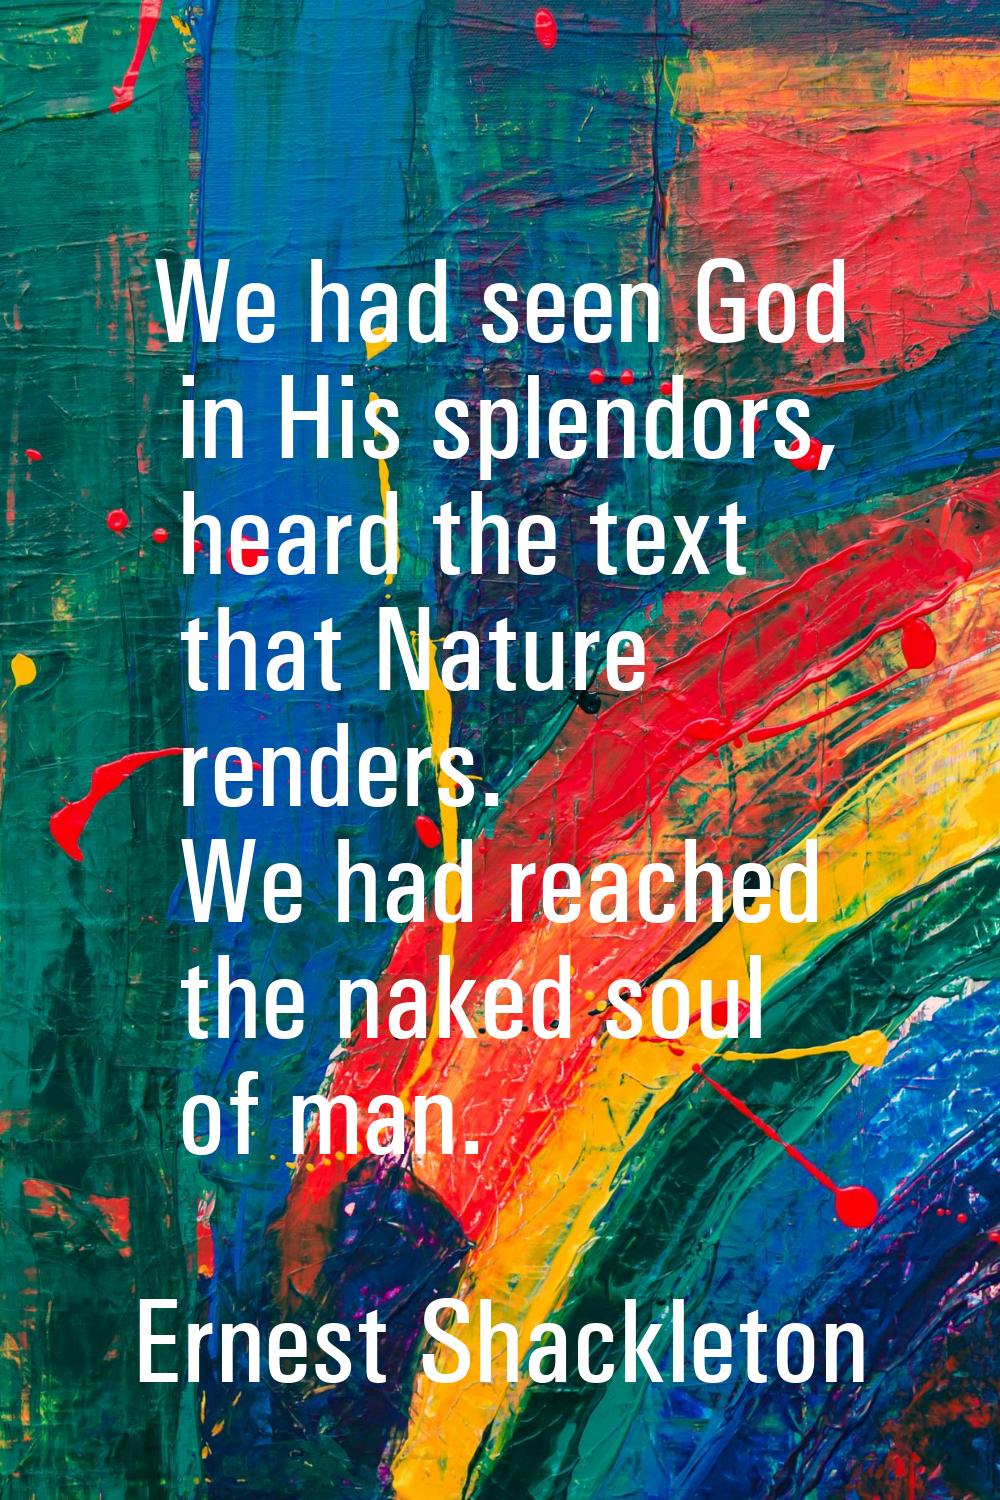 We had seen God in His splendors, heard the text that Nature renders. We had reached the naked soul